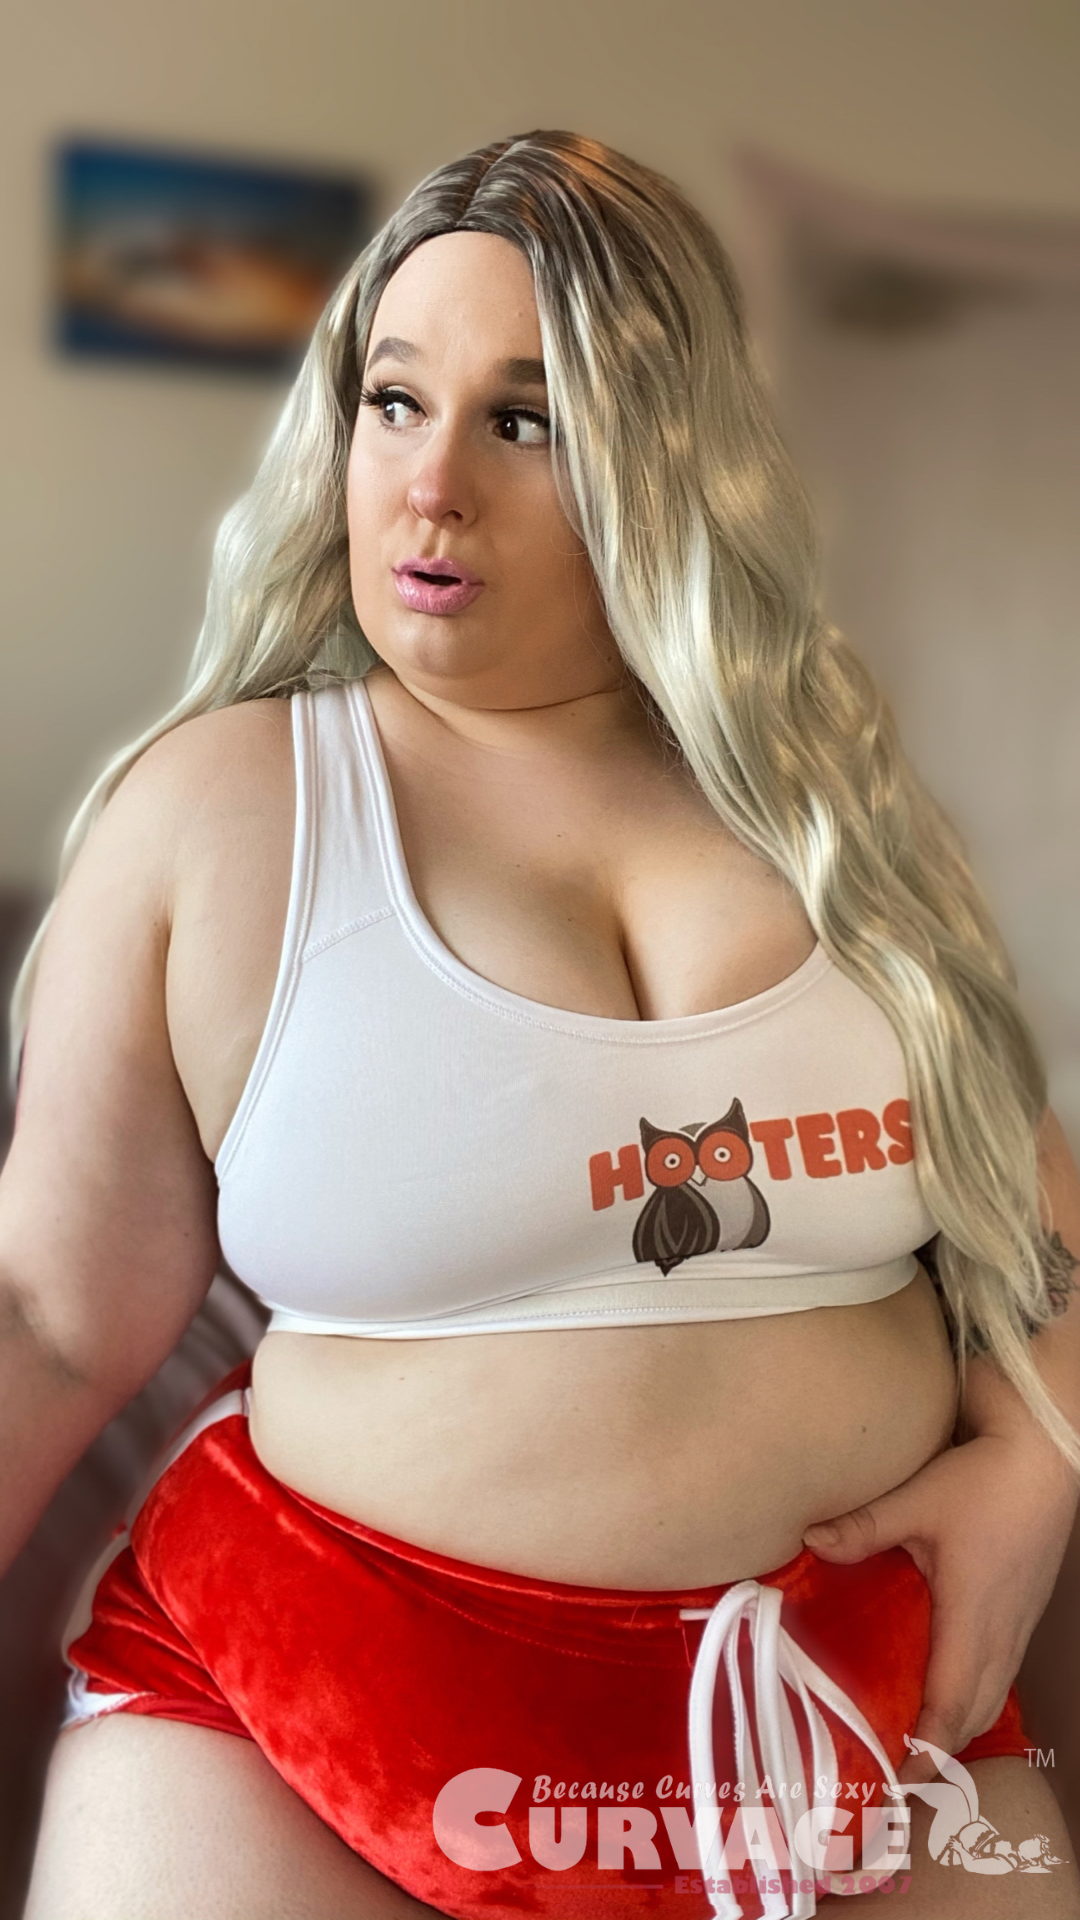 Fat Hooters Girls Skype Interview - Video Clips - Curvy